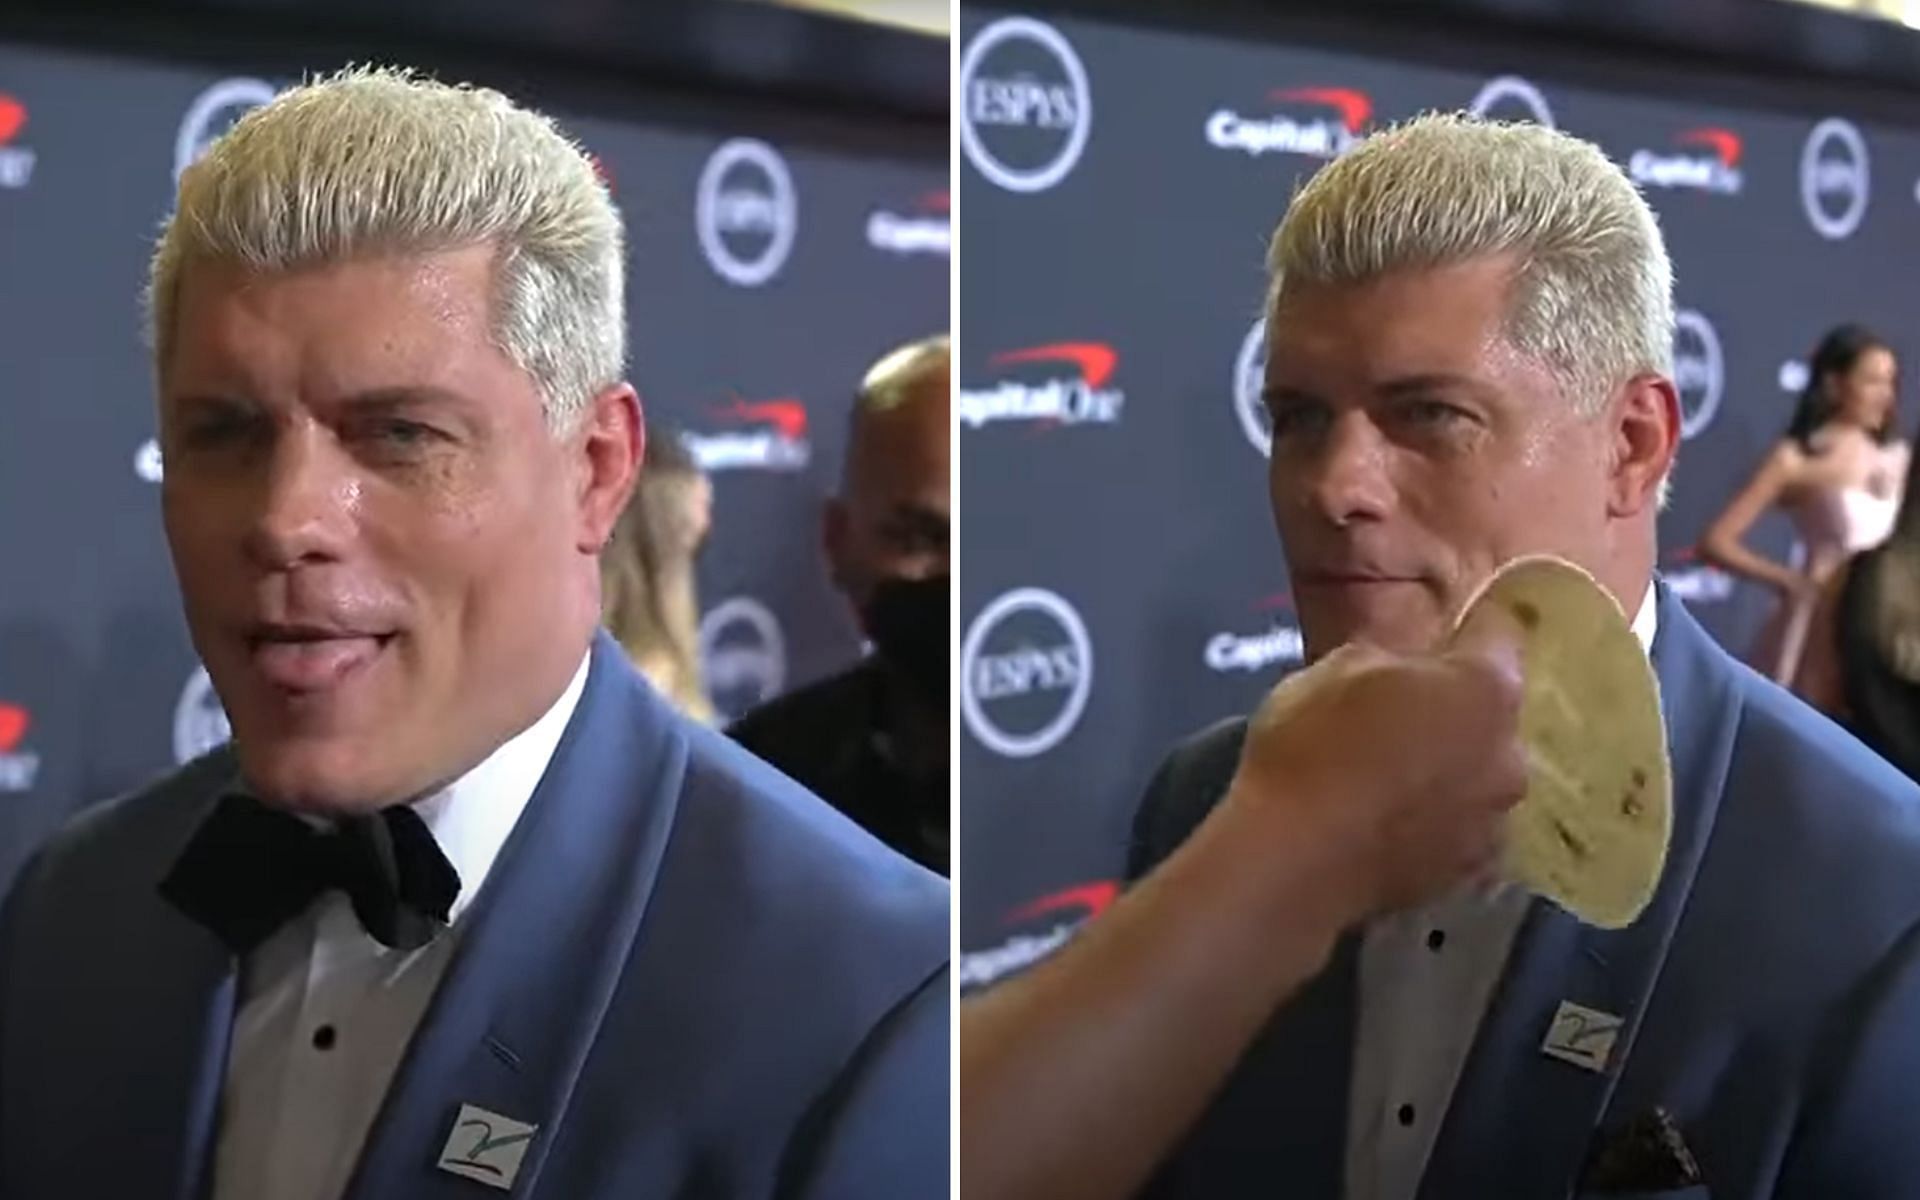 Cody Rhodes appeared at the 2022 ESPY Awards